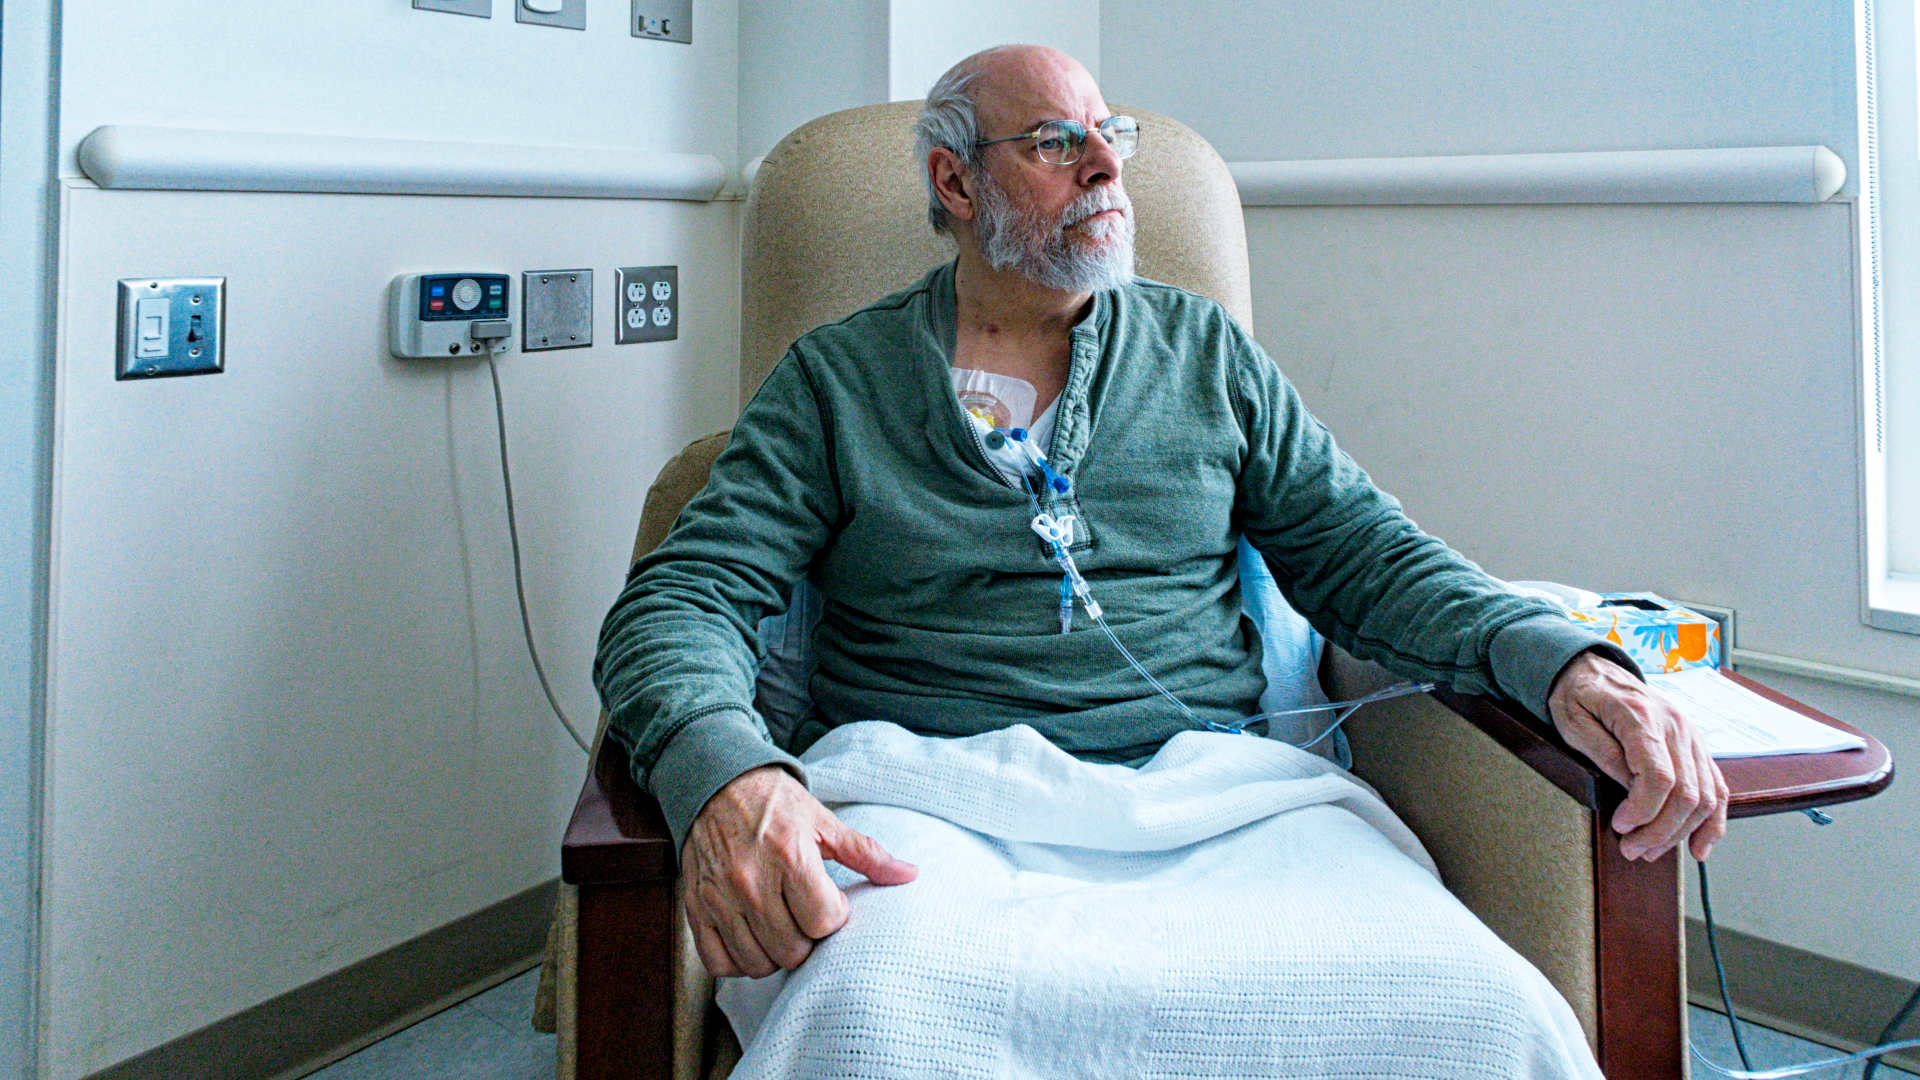 A senior cancer patient receives chemotherapy. Many forms of chemotherapy have proven to be more toxic in older adults, a discovery that came only after the drugs were approved for use in this population.